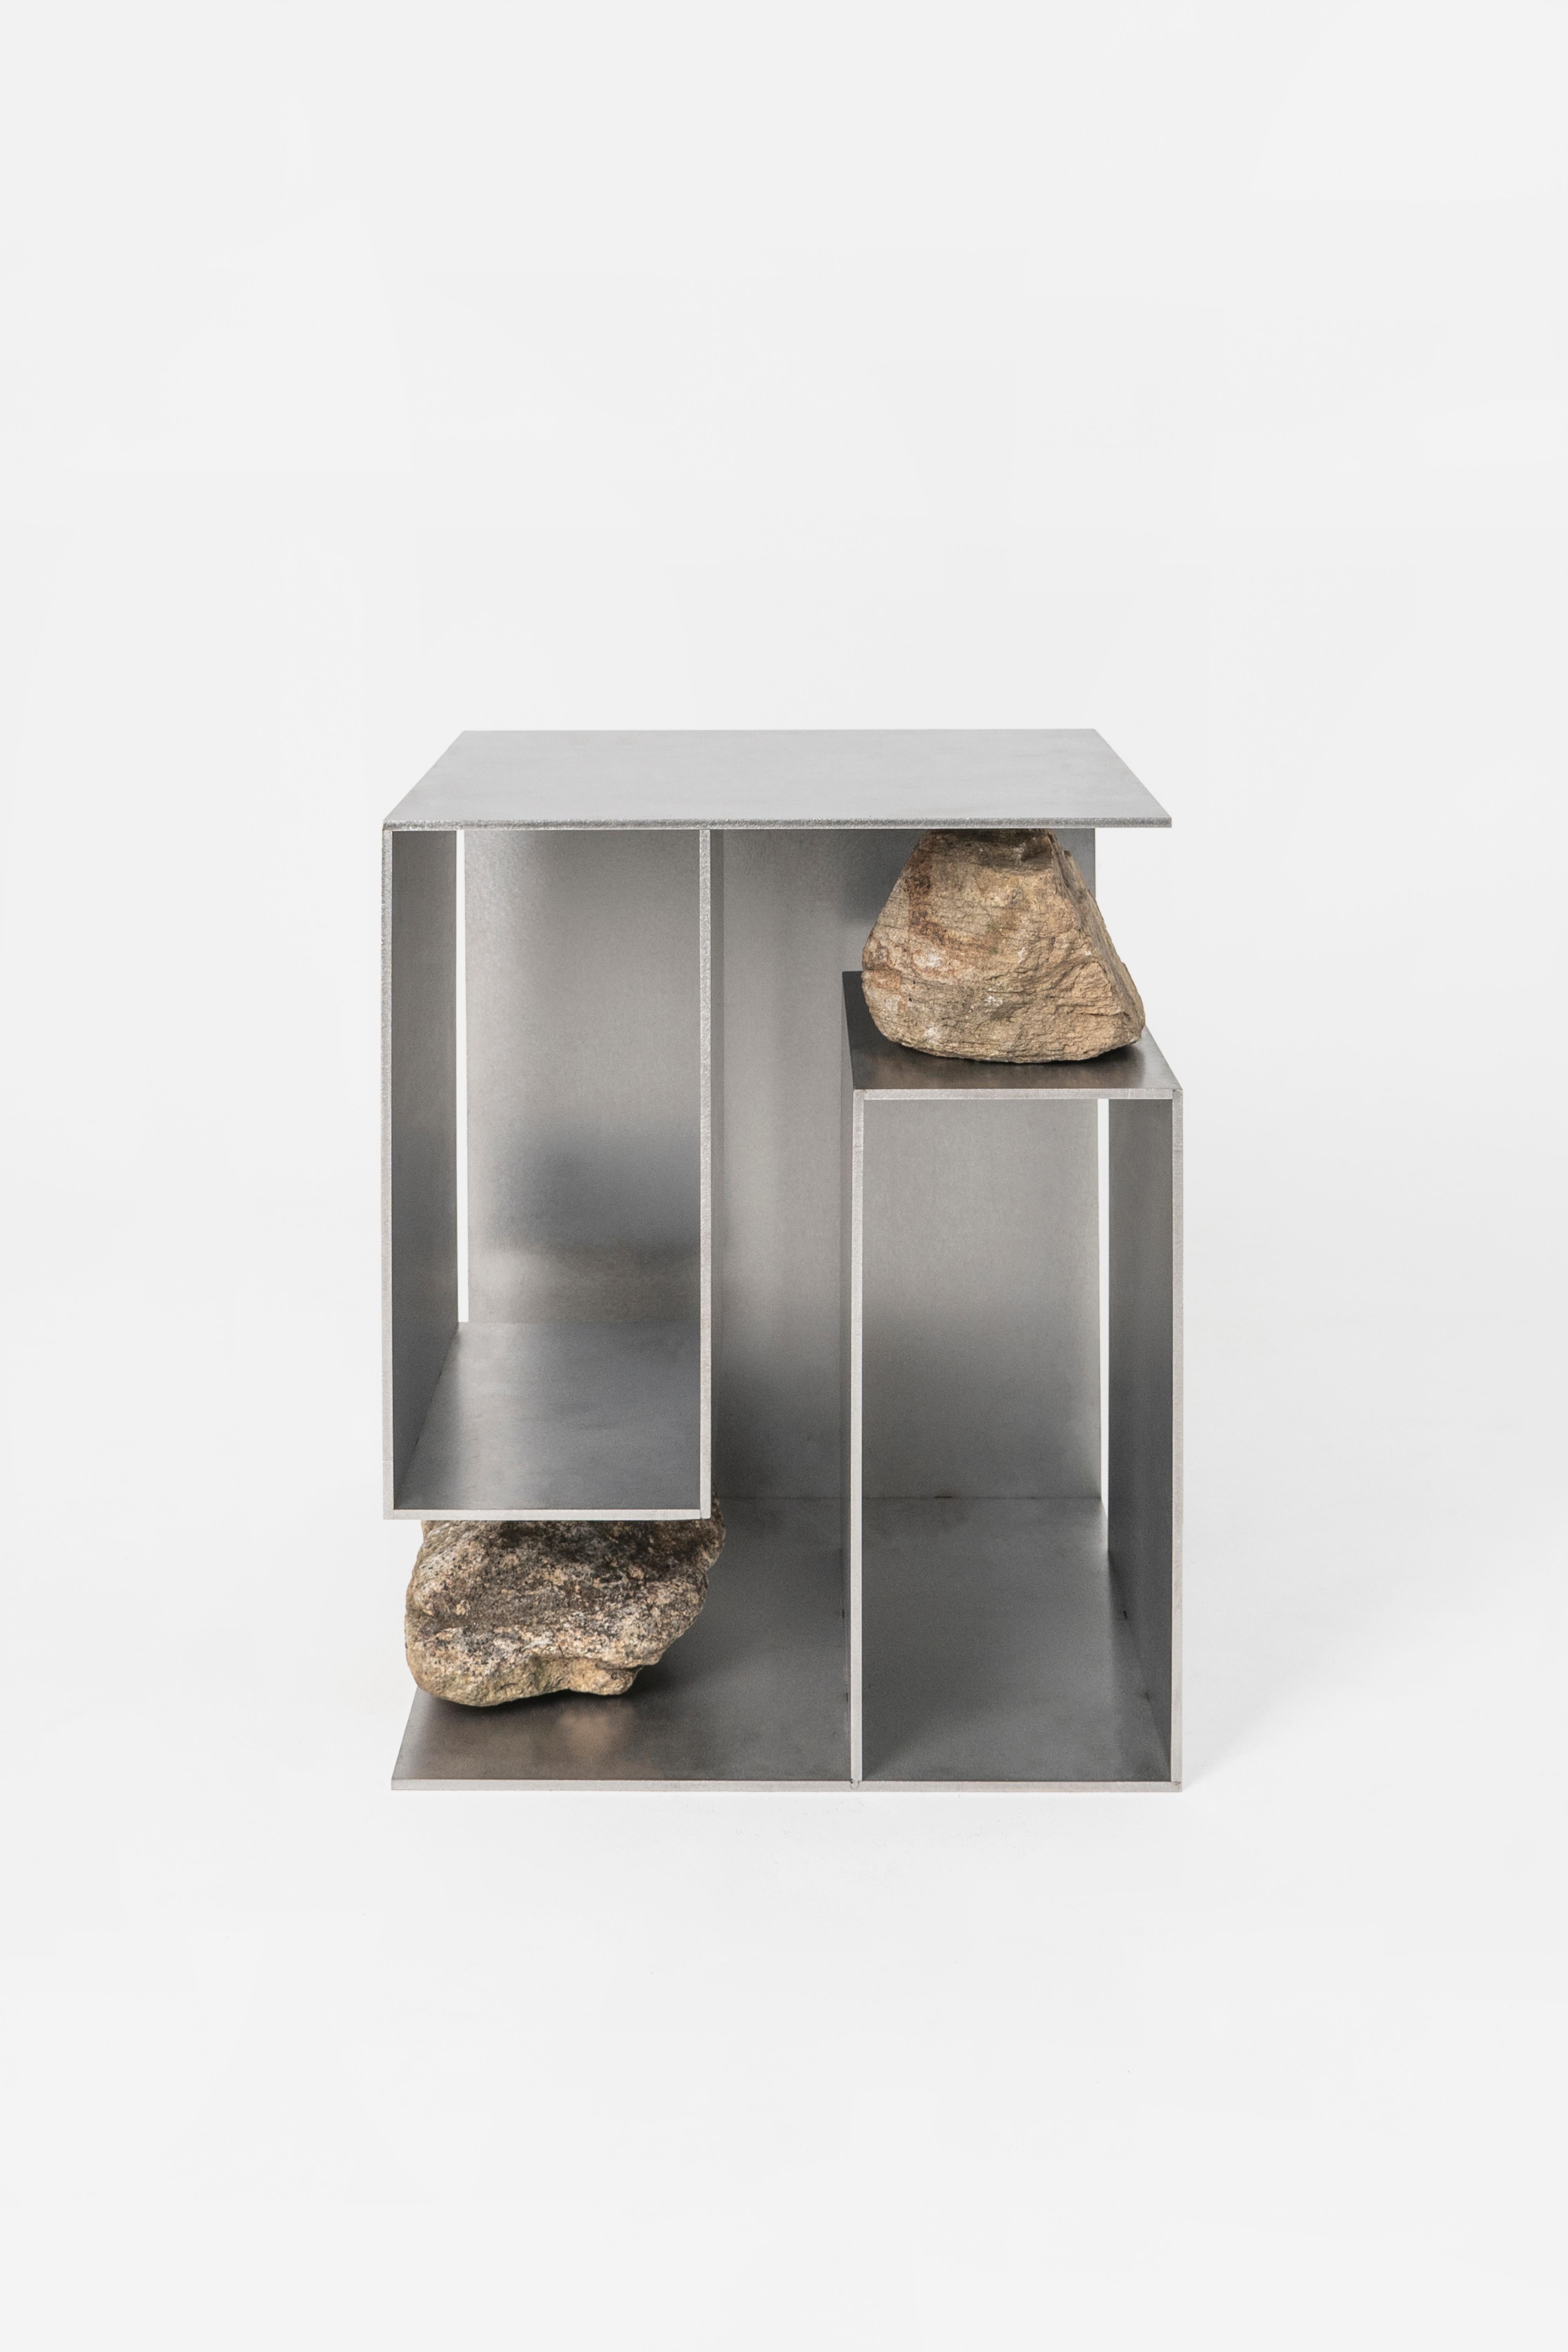 Proportions of stone stool 04 by Lee Sisan
2020
Dimensions: W 36 x D 36 x H 45 cm
Materials: Stainless steel, natural stone
Each piece is made to order and uses natural stones, so please expect some variability in design.
